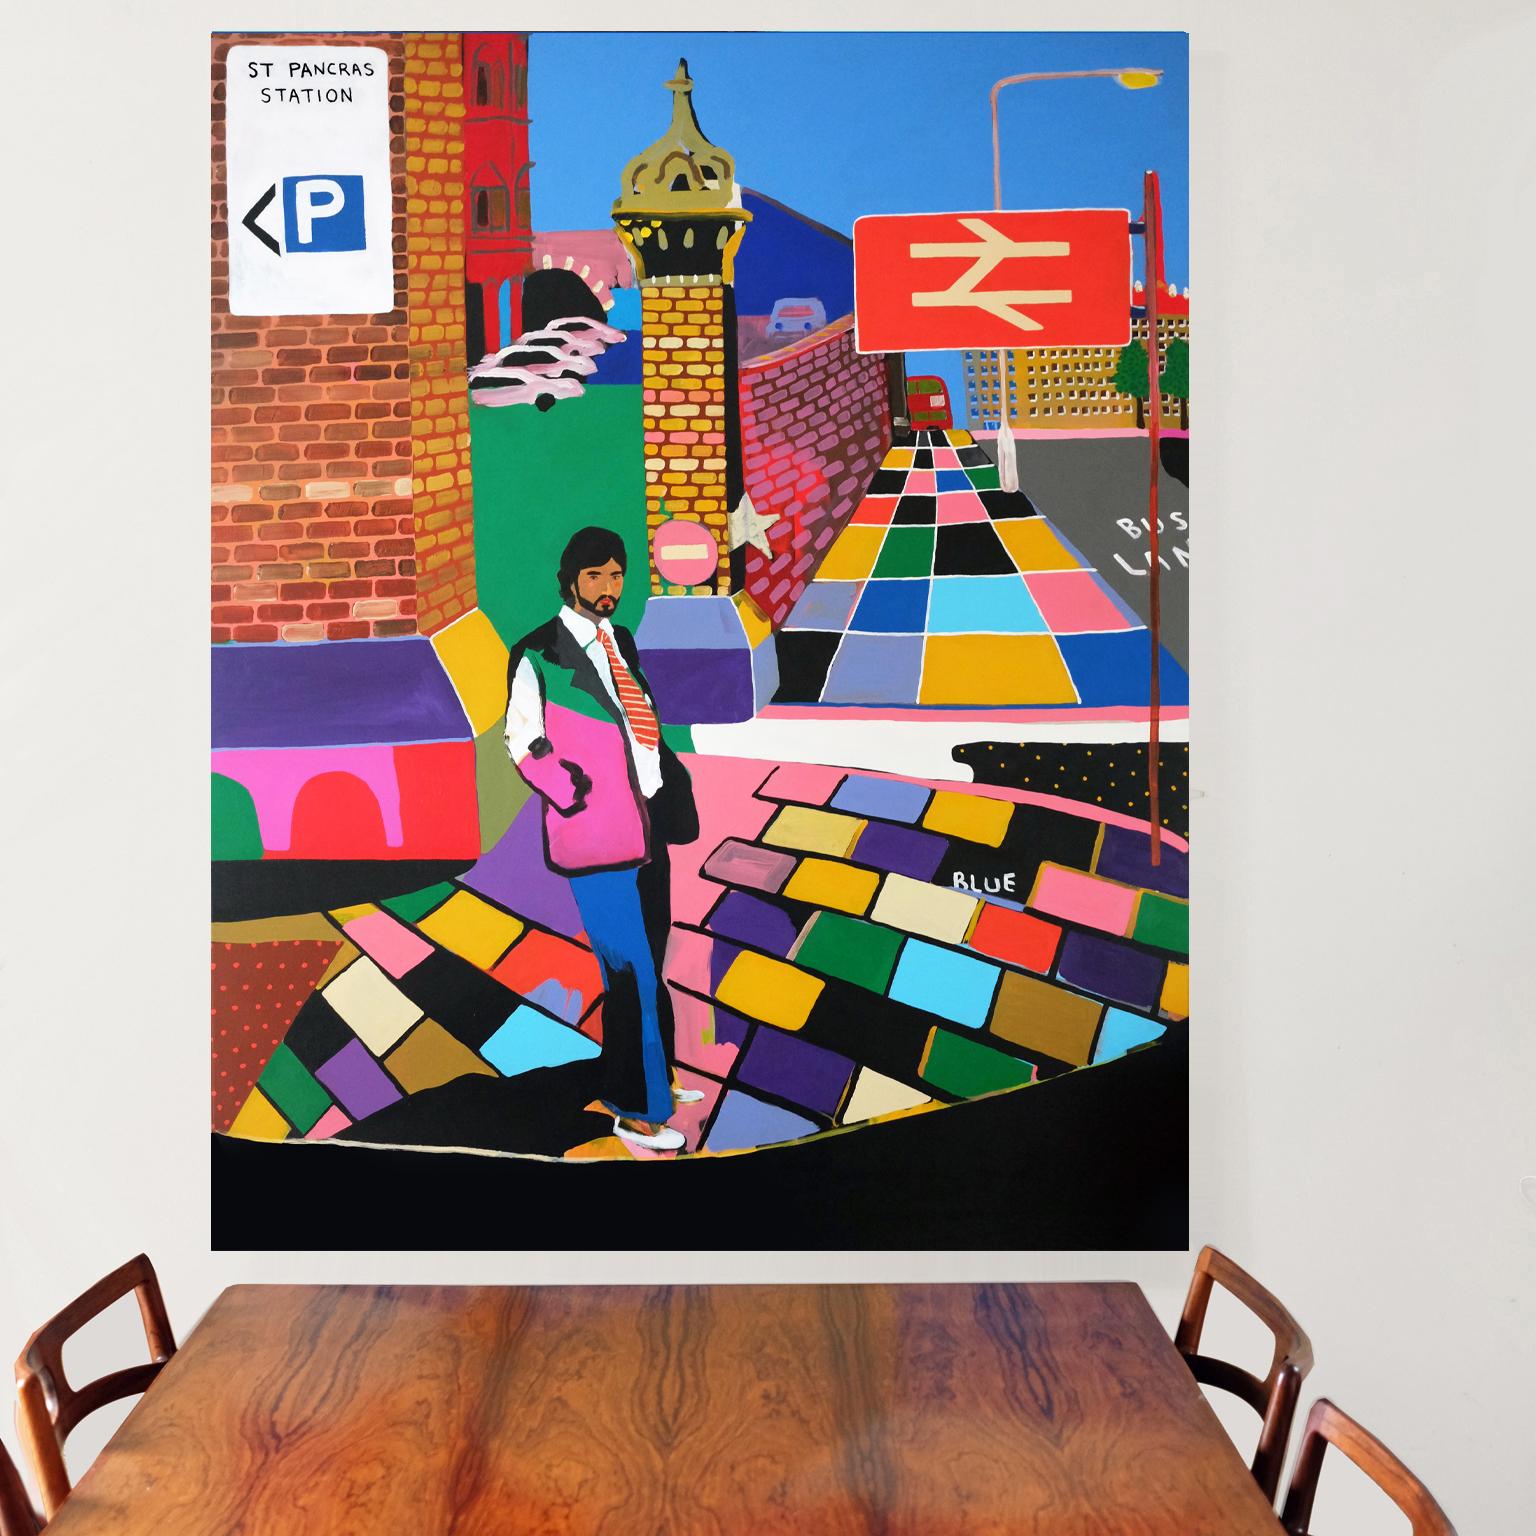 Acrylic on canvas by Alan Fears, 2019. 

Alan Fears (b. 1974) is an emerging British artist was shortlisted for the John Moores painting prize, 2018 and is featured on the cover of the 229 Summer issue of The Paris Review.

'A naive artist, a